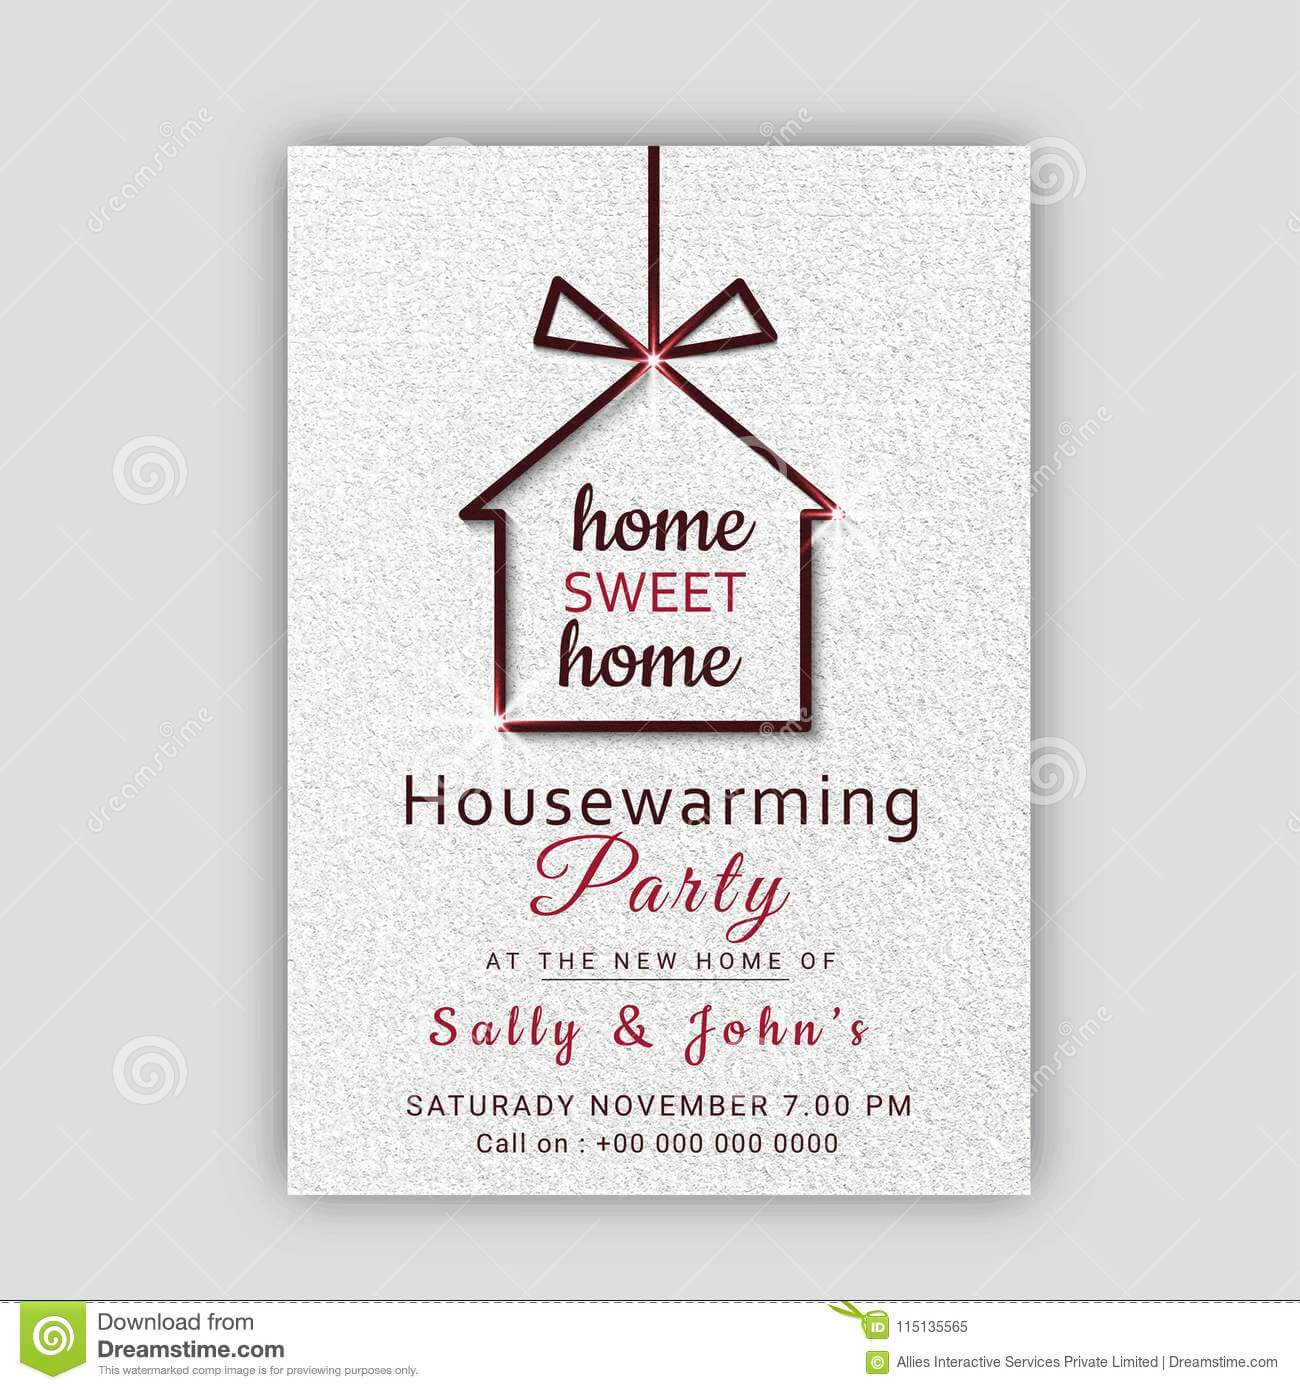 001 Housewarming Party Invitations Templates Template Ideas Regarding Free Housewarming Invitation Card Template